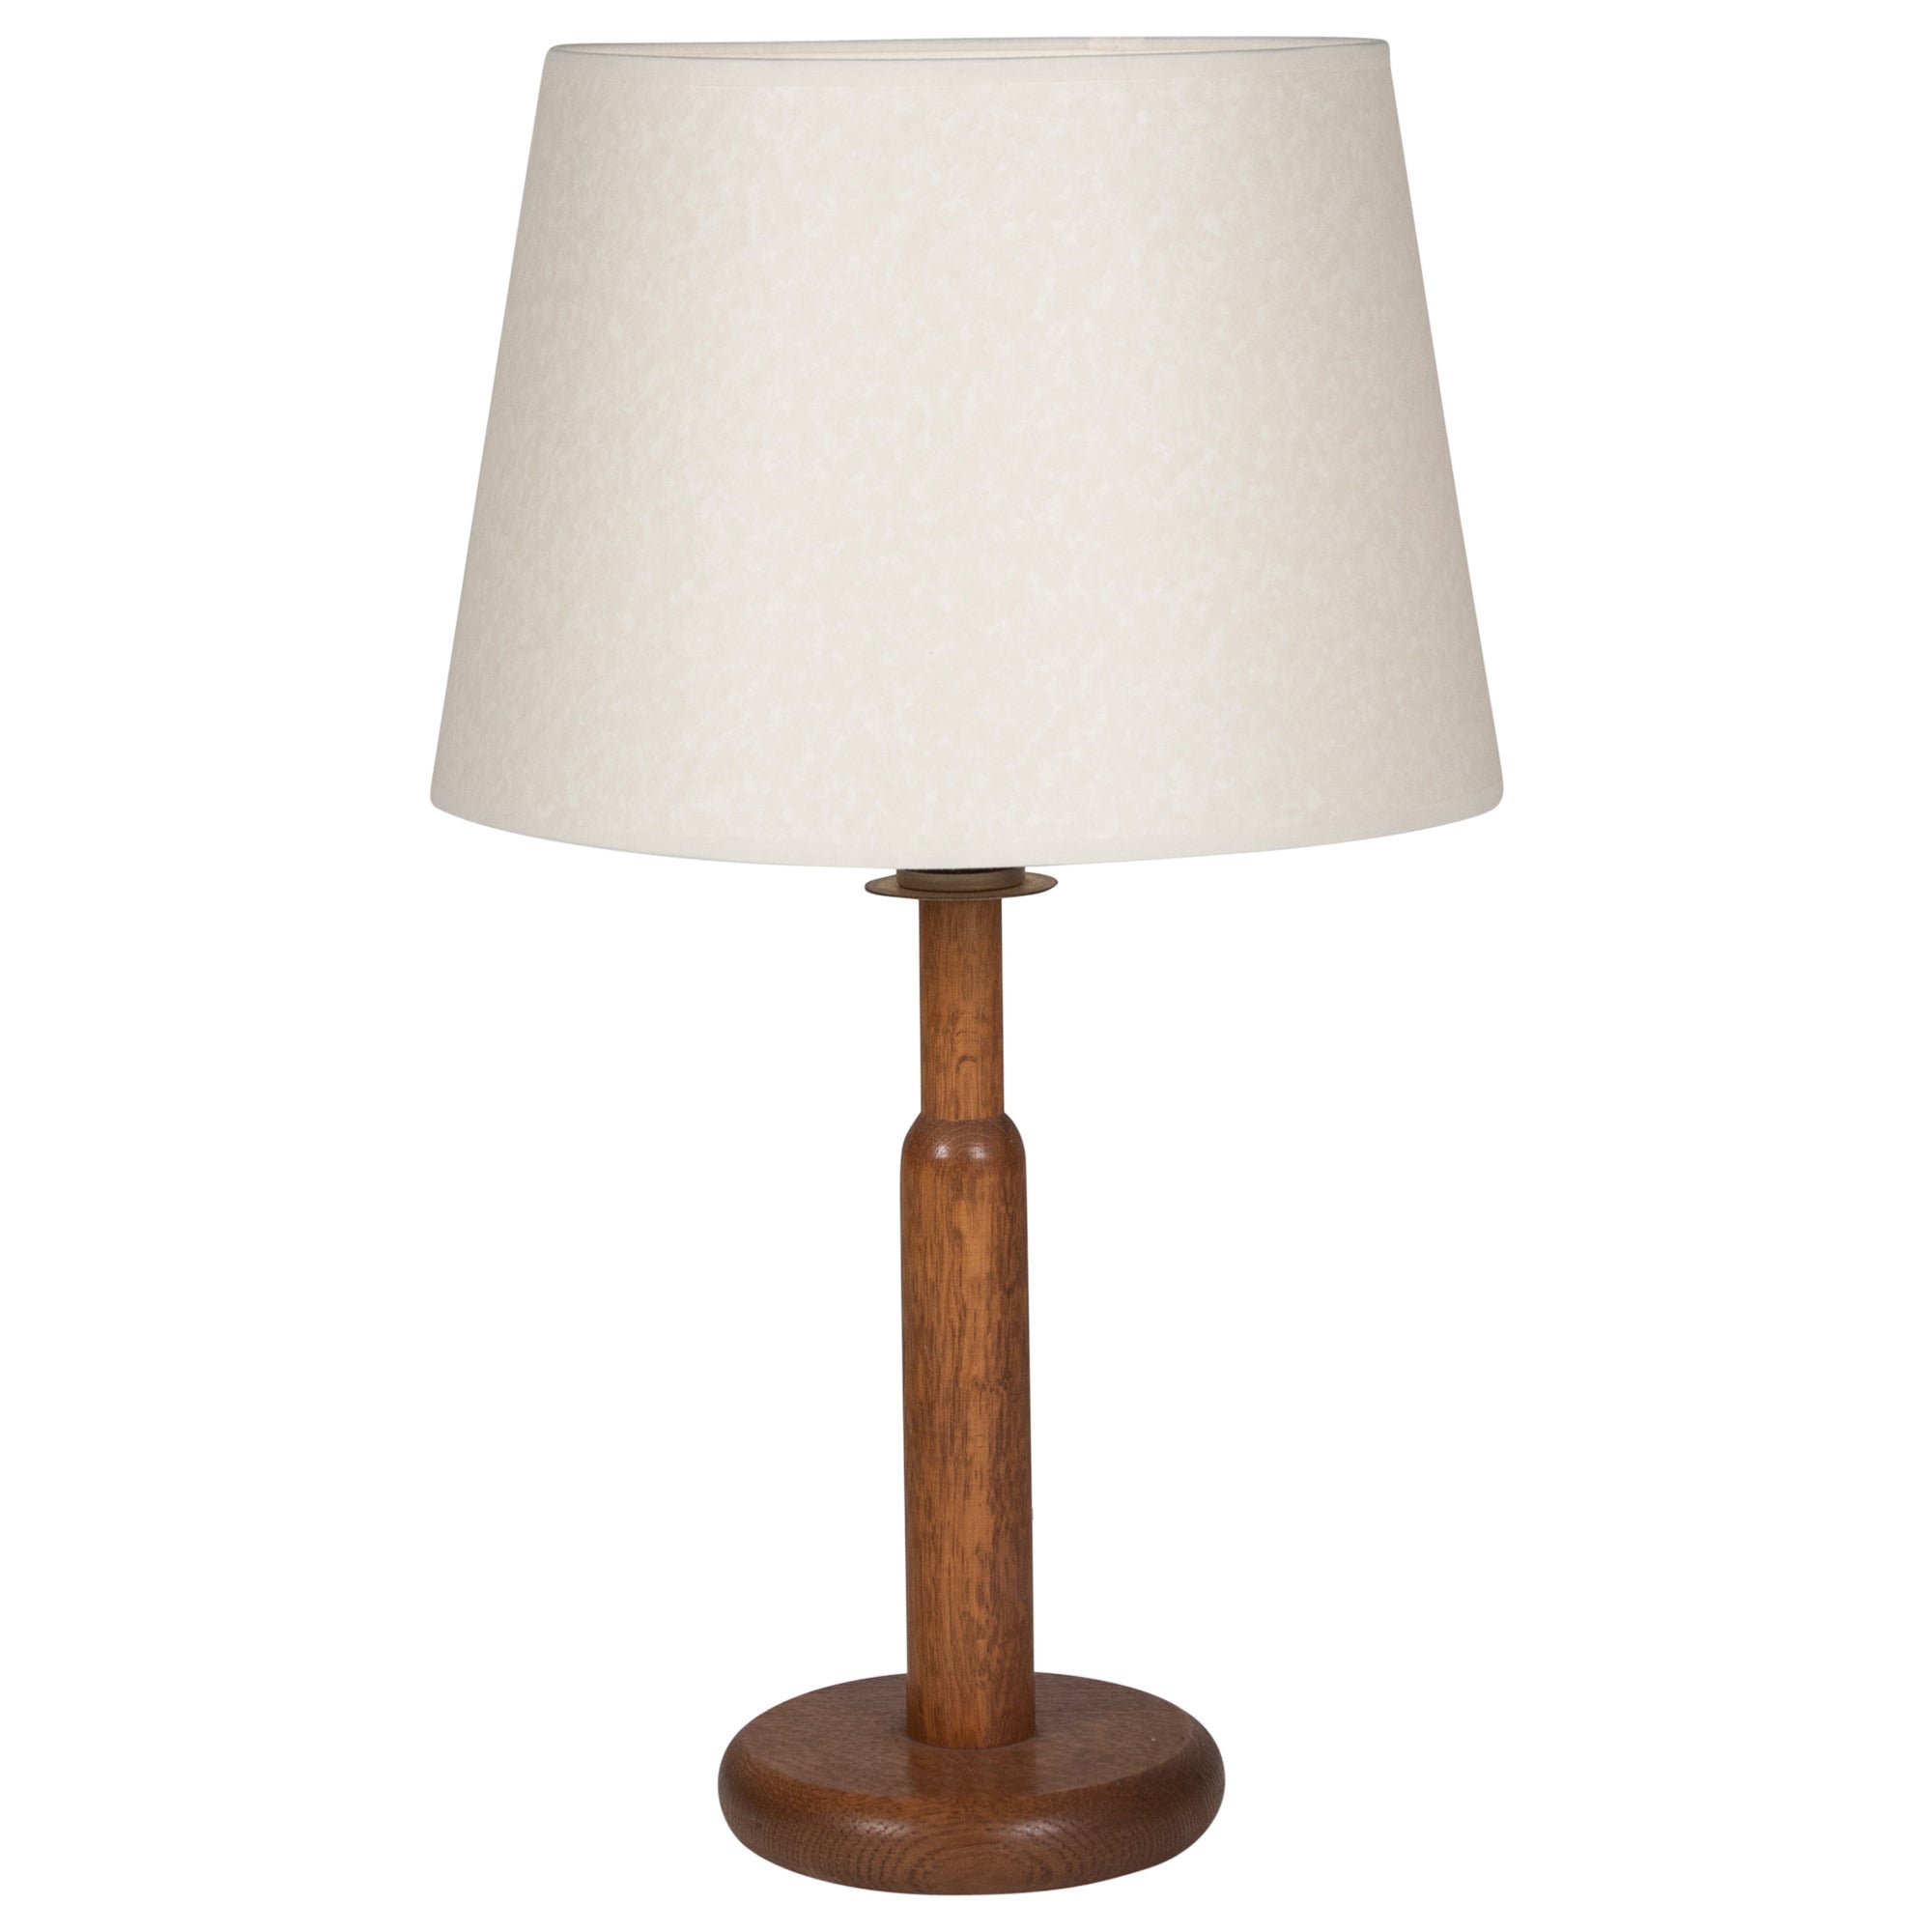 Turned Elm Wood Table Lamp For Sale